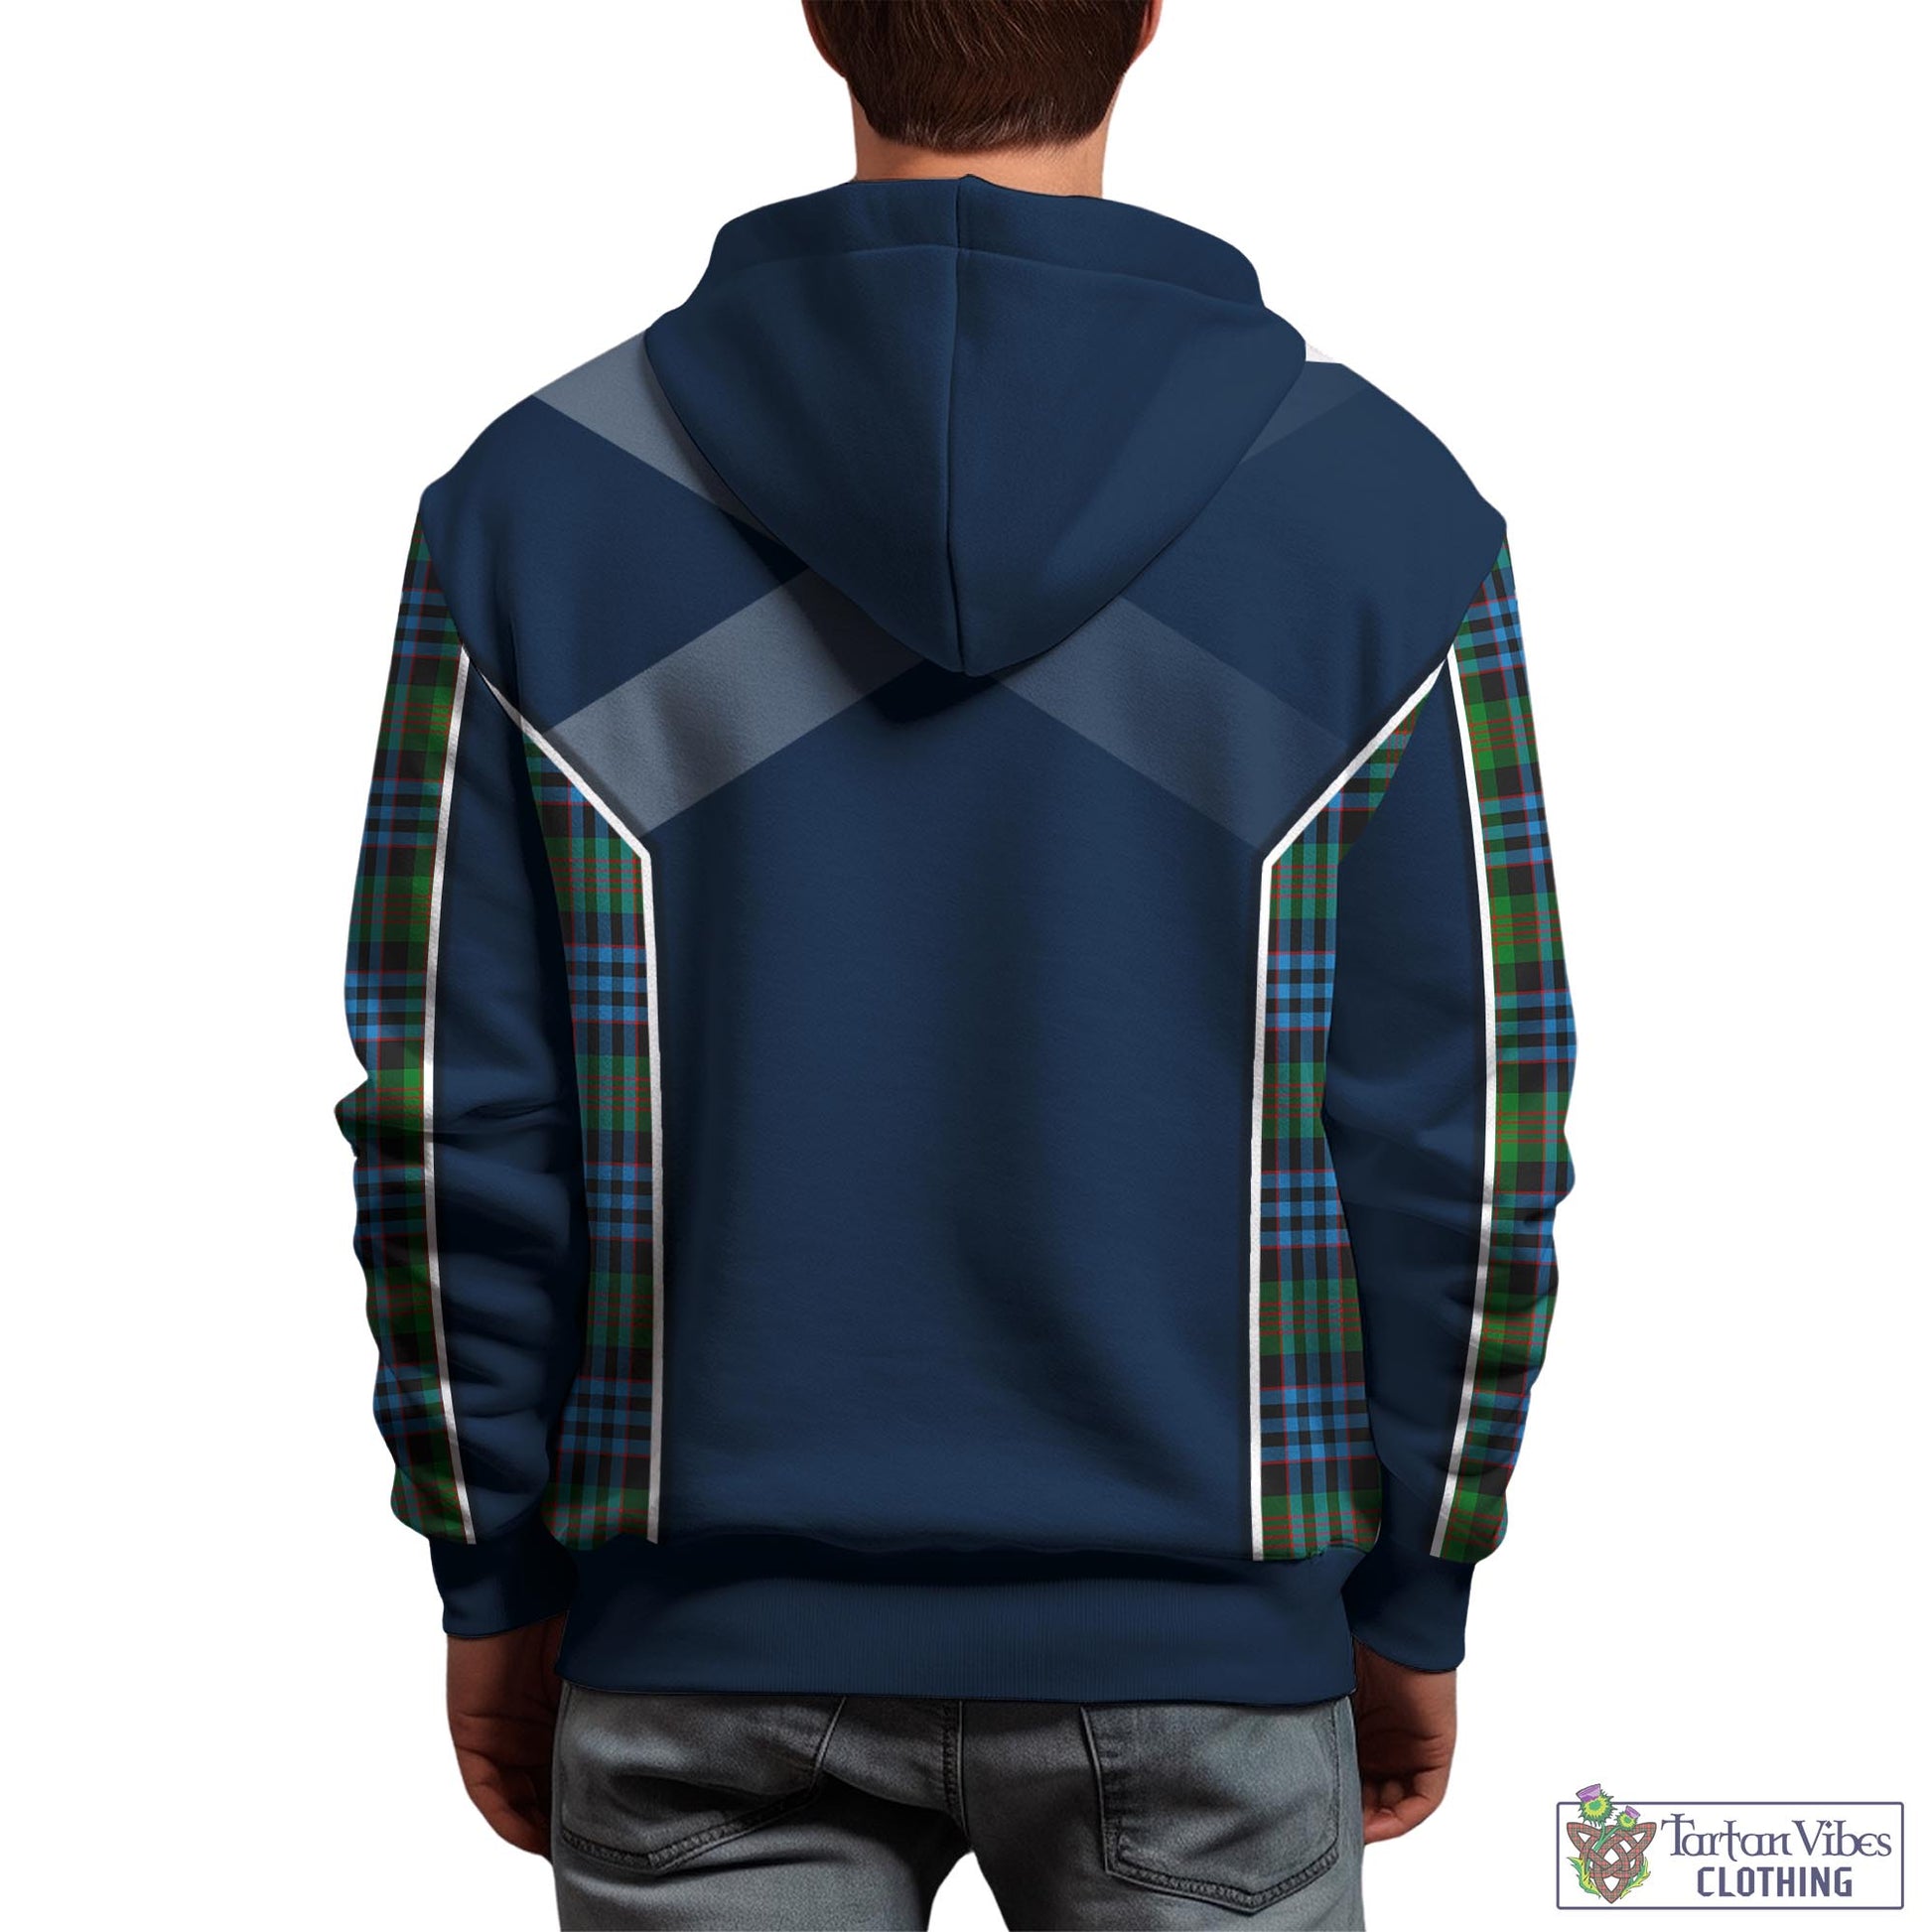 Tartan Vibes Clothing Newlands of Lauriston Tartan Hoodie with Family Crest and Scottish Thistle Vibes Sport Style